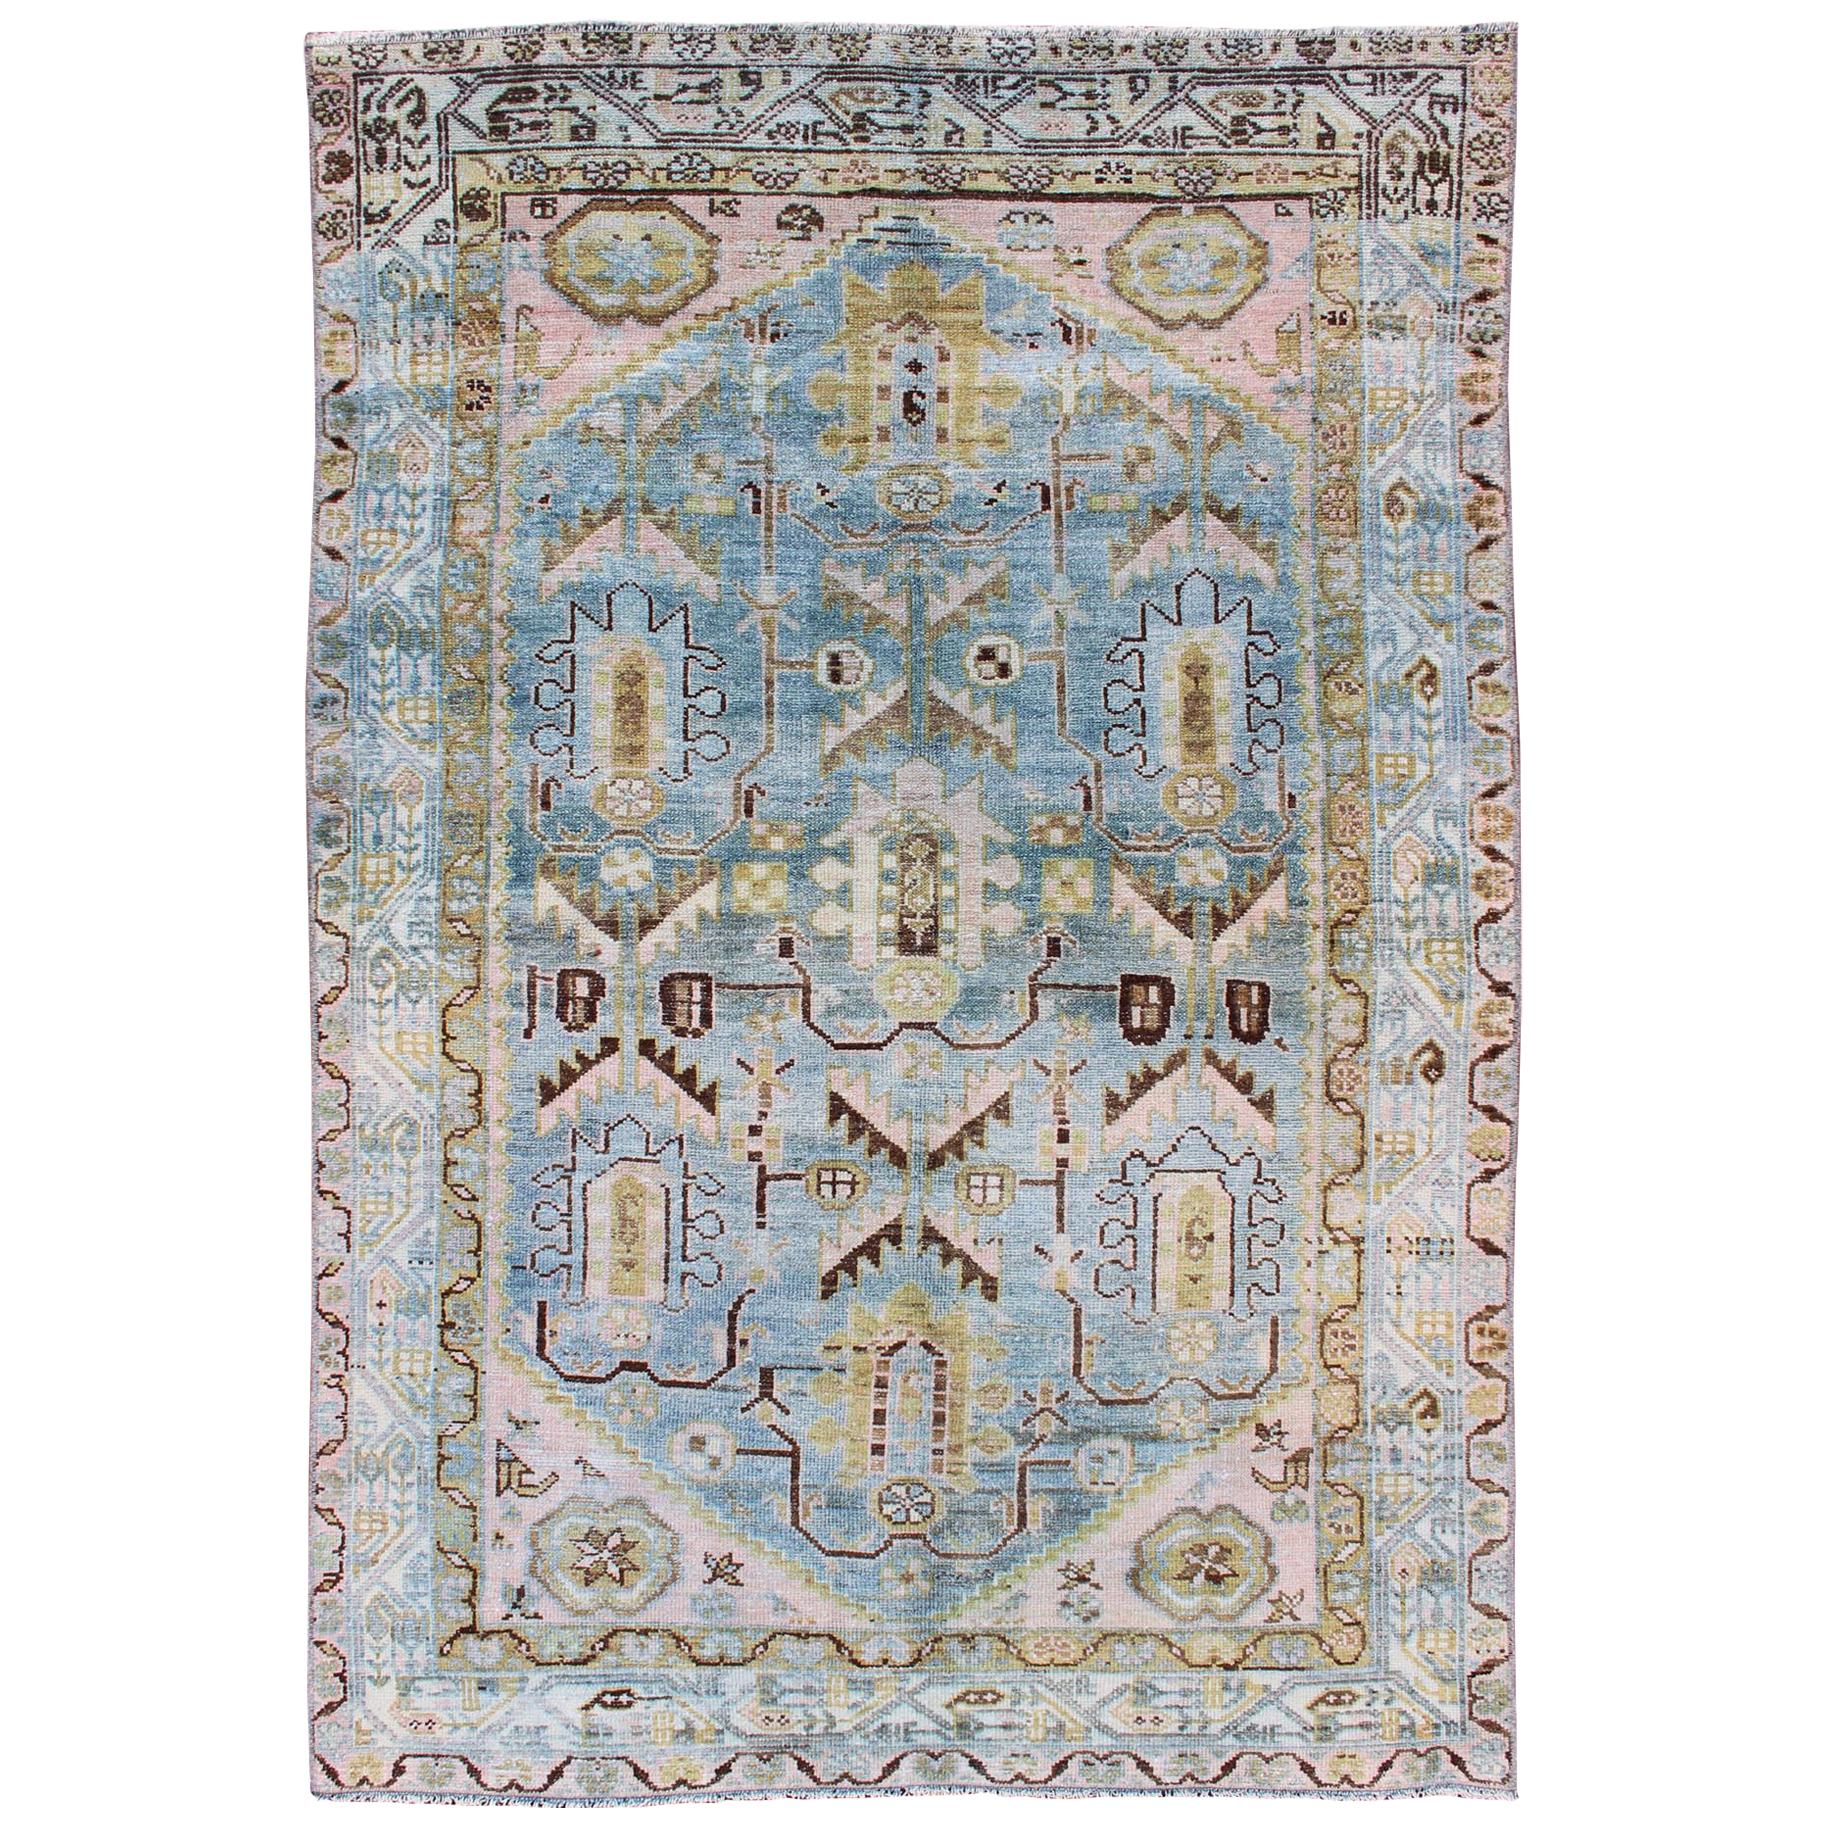 Antique Geometric Design Persian Malayer Rug in Light Blue, Pink, and Green For Sale